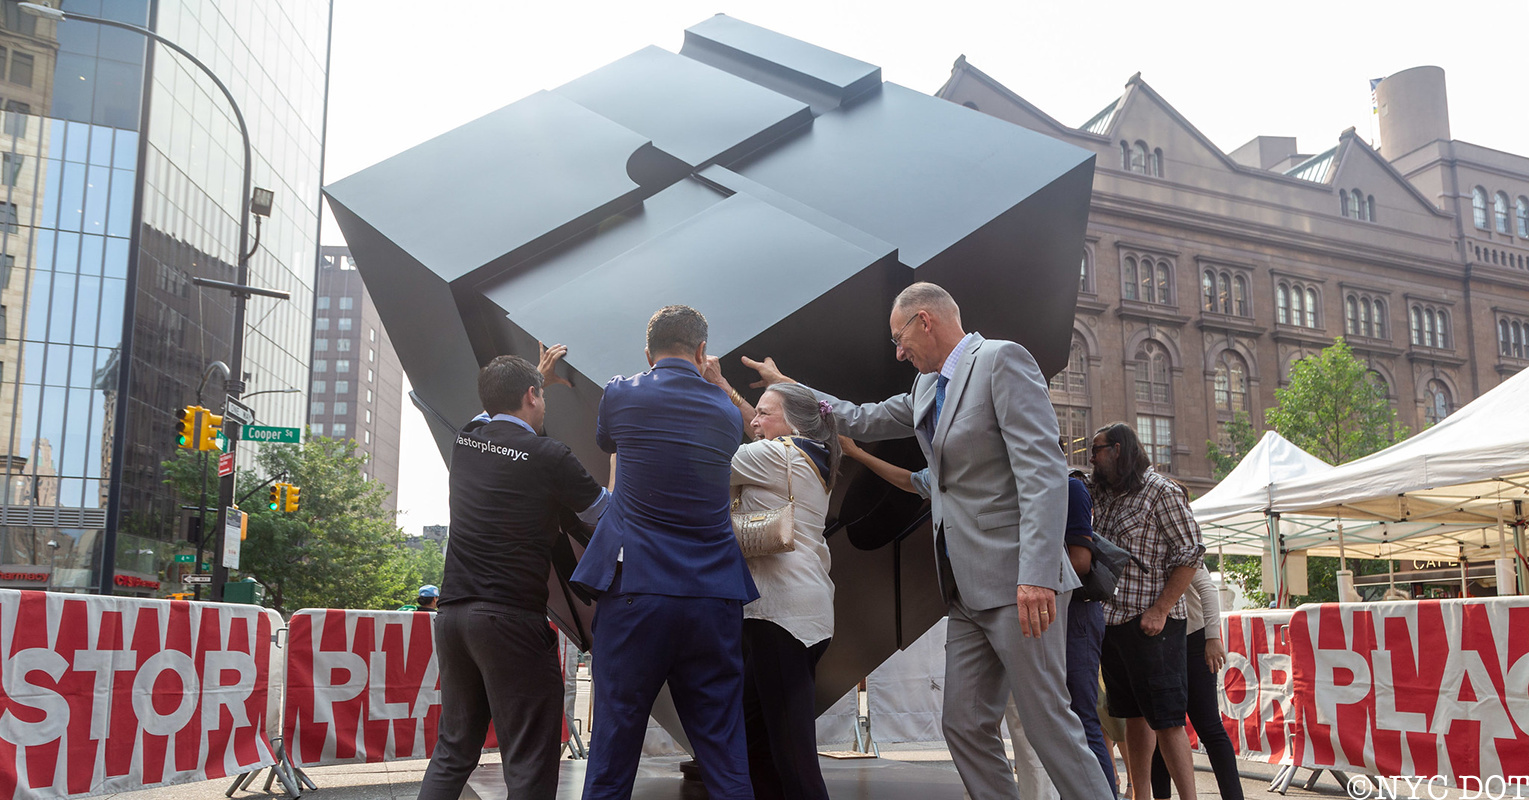 NYC officials spin the Astor Place Cube